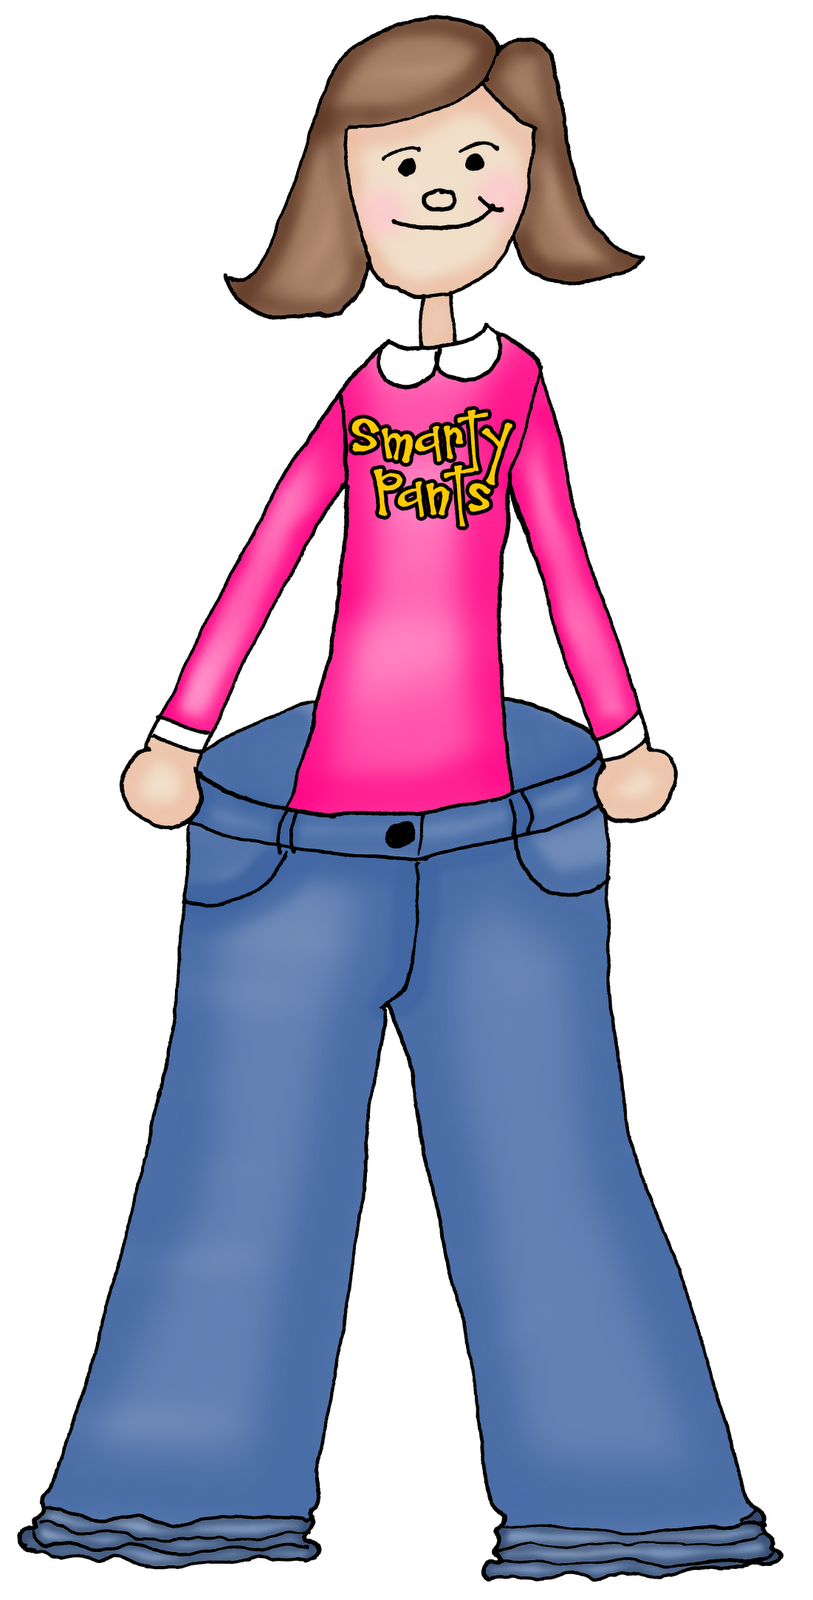 Smarty Pants Clip Art Images   Pictures   Becuo